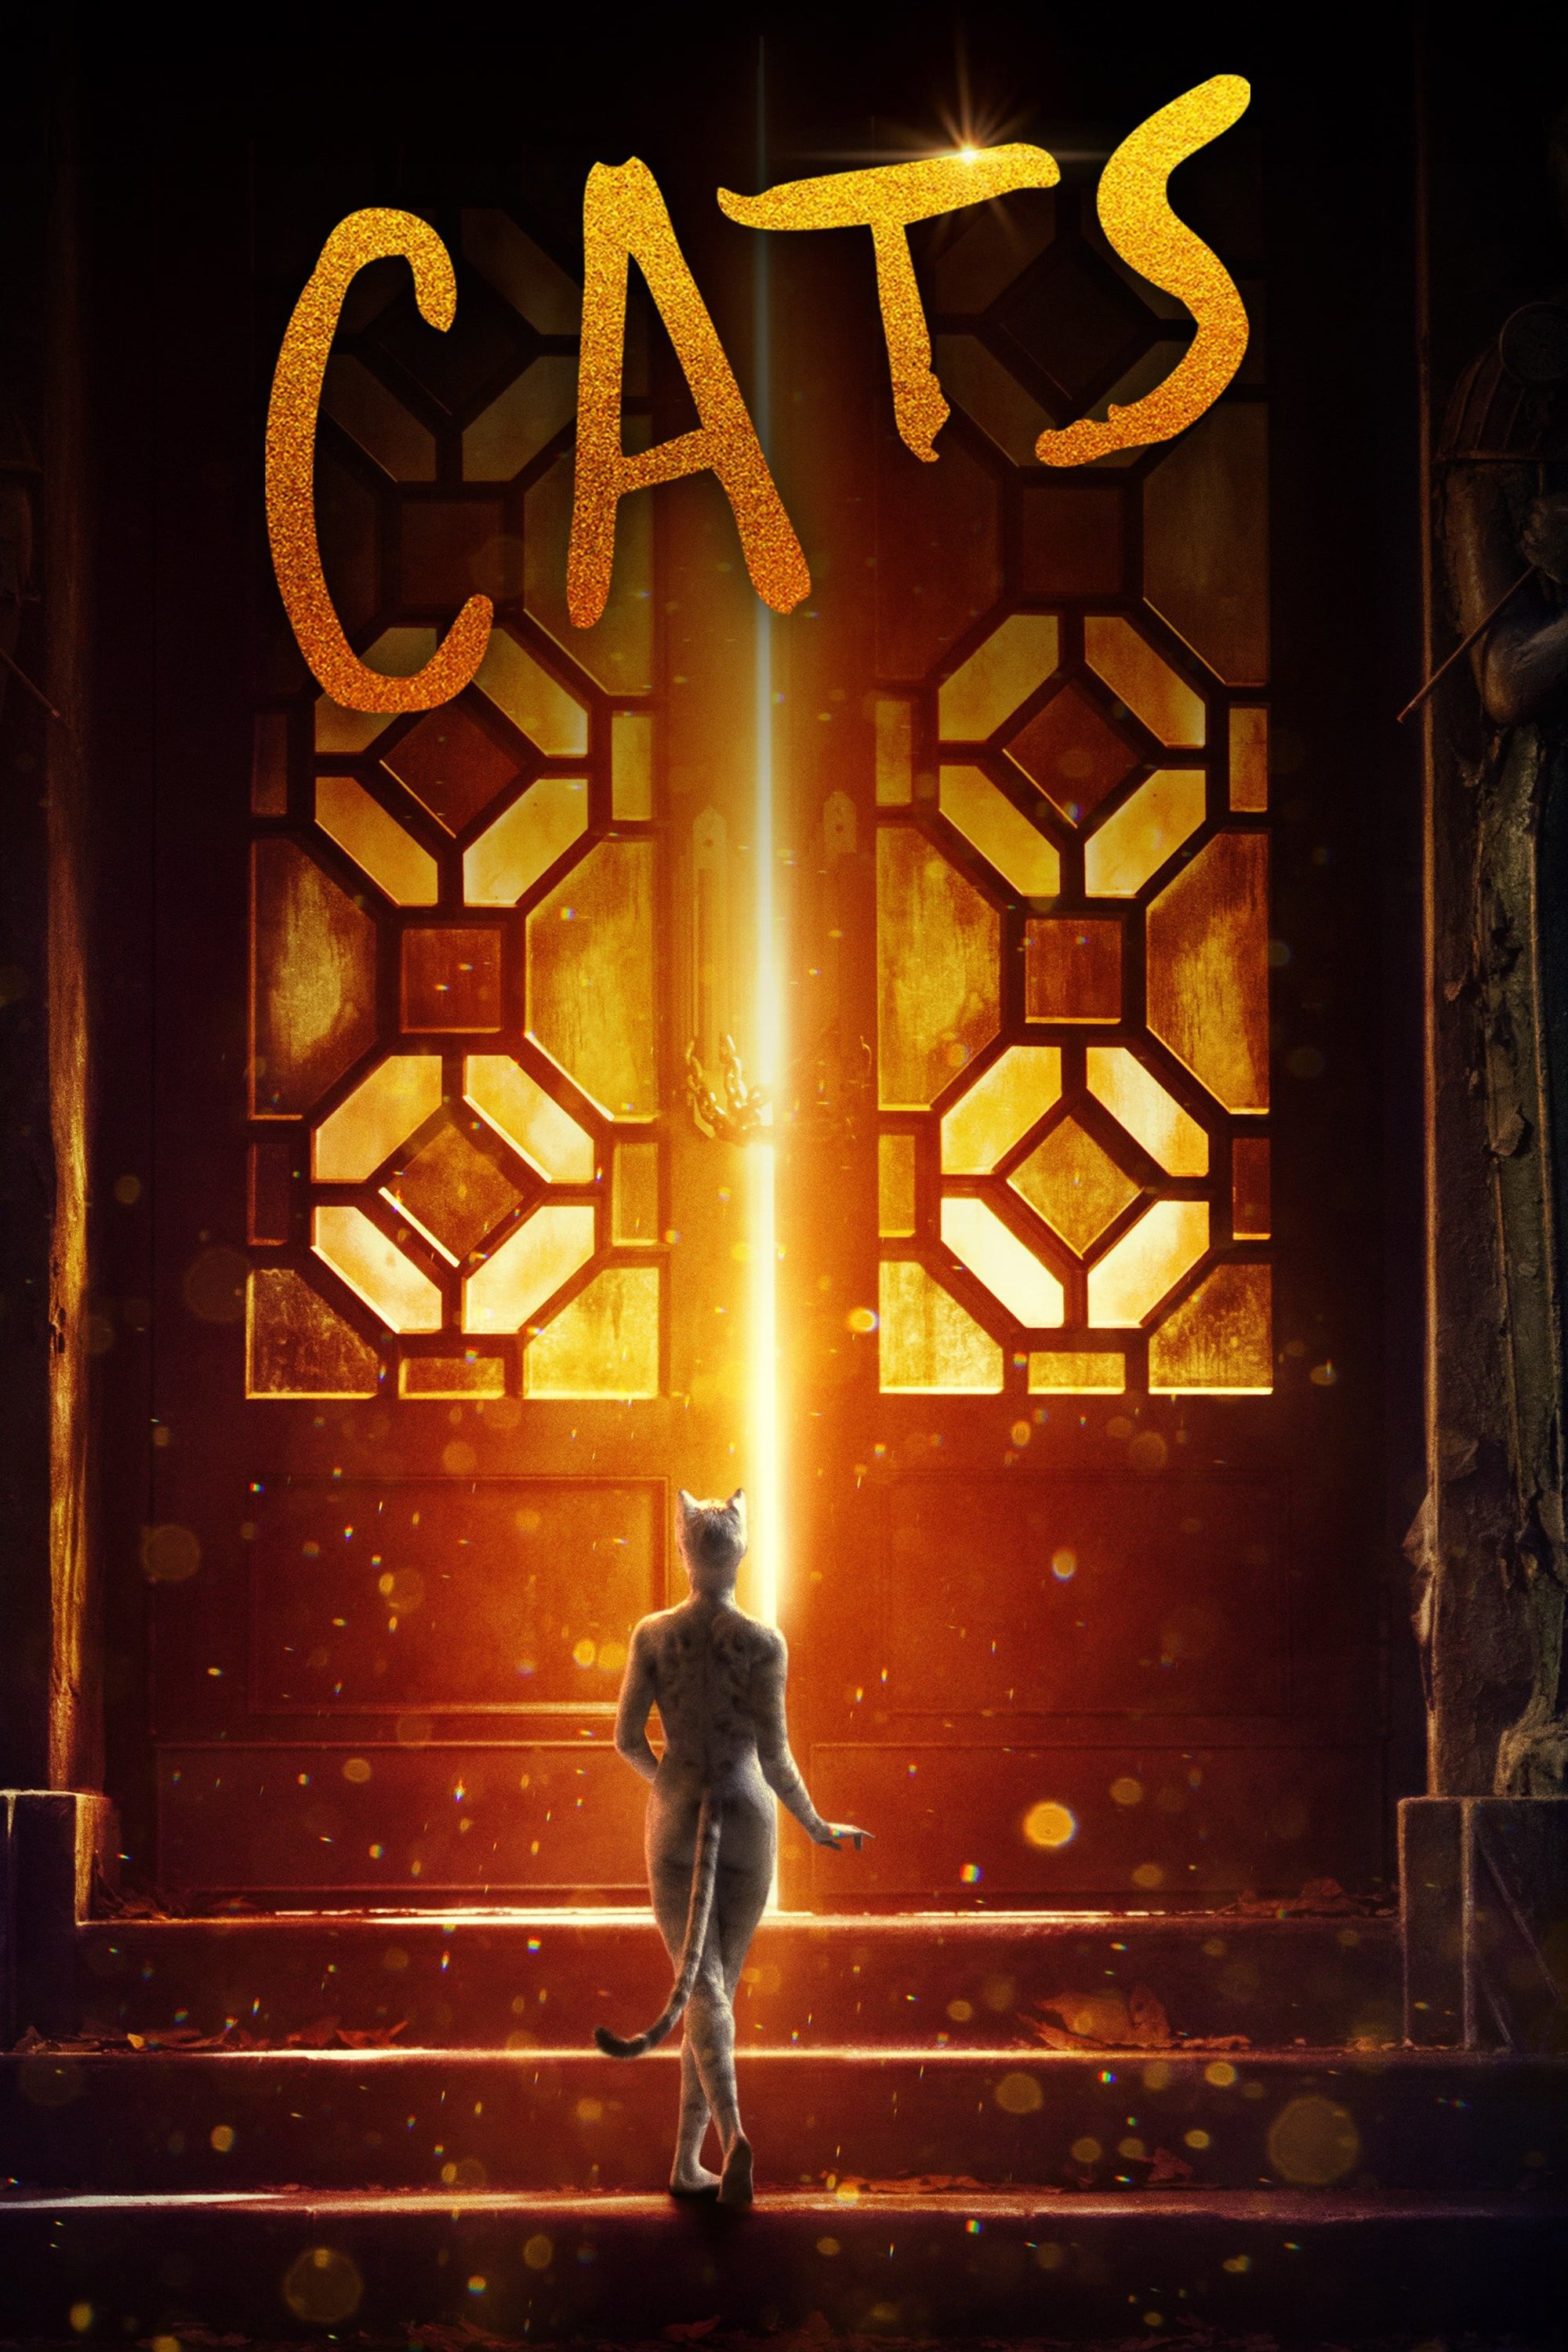 Poster for the movie "Cats"